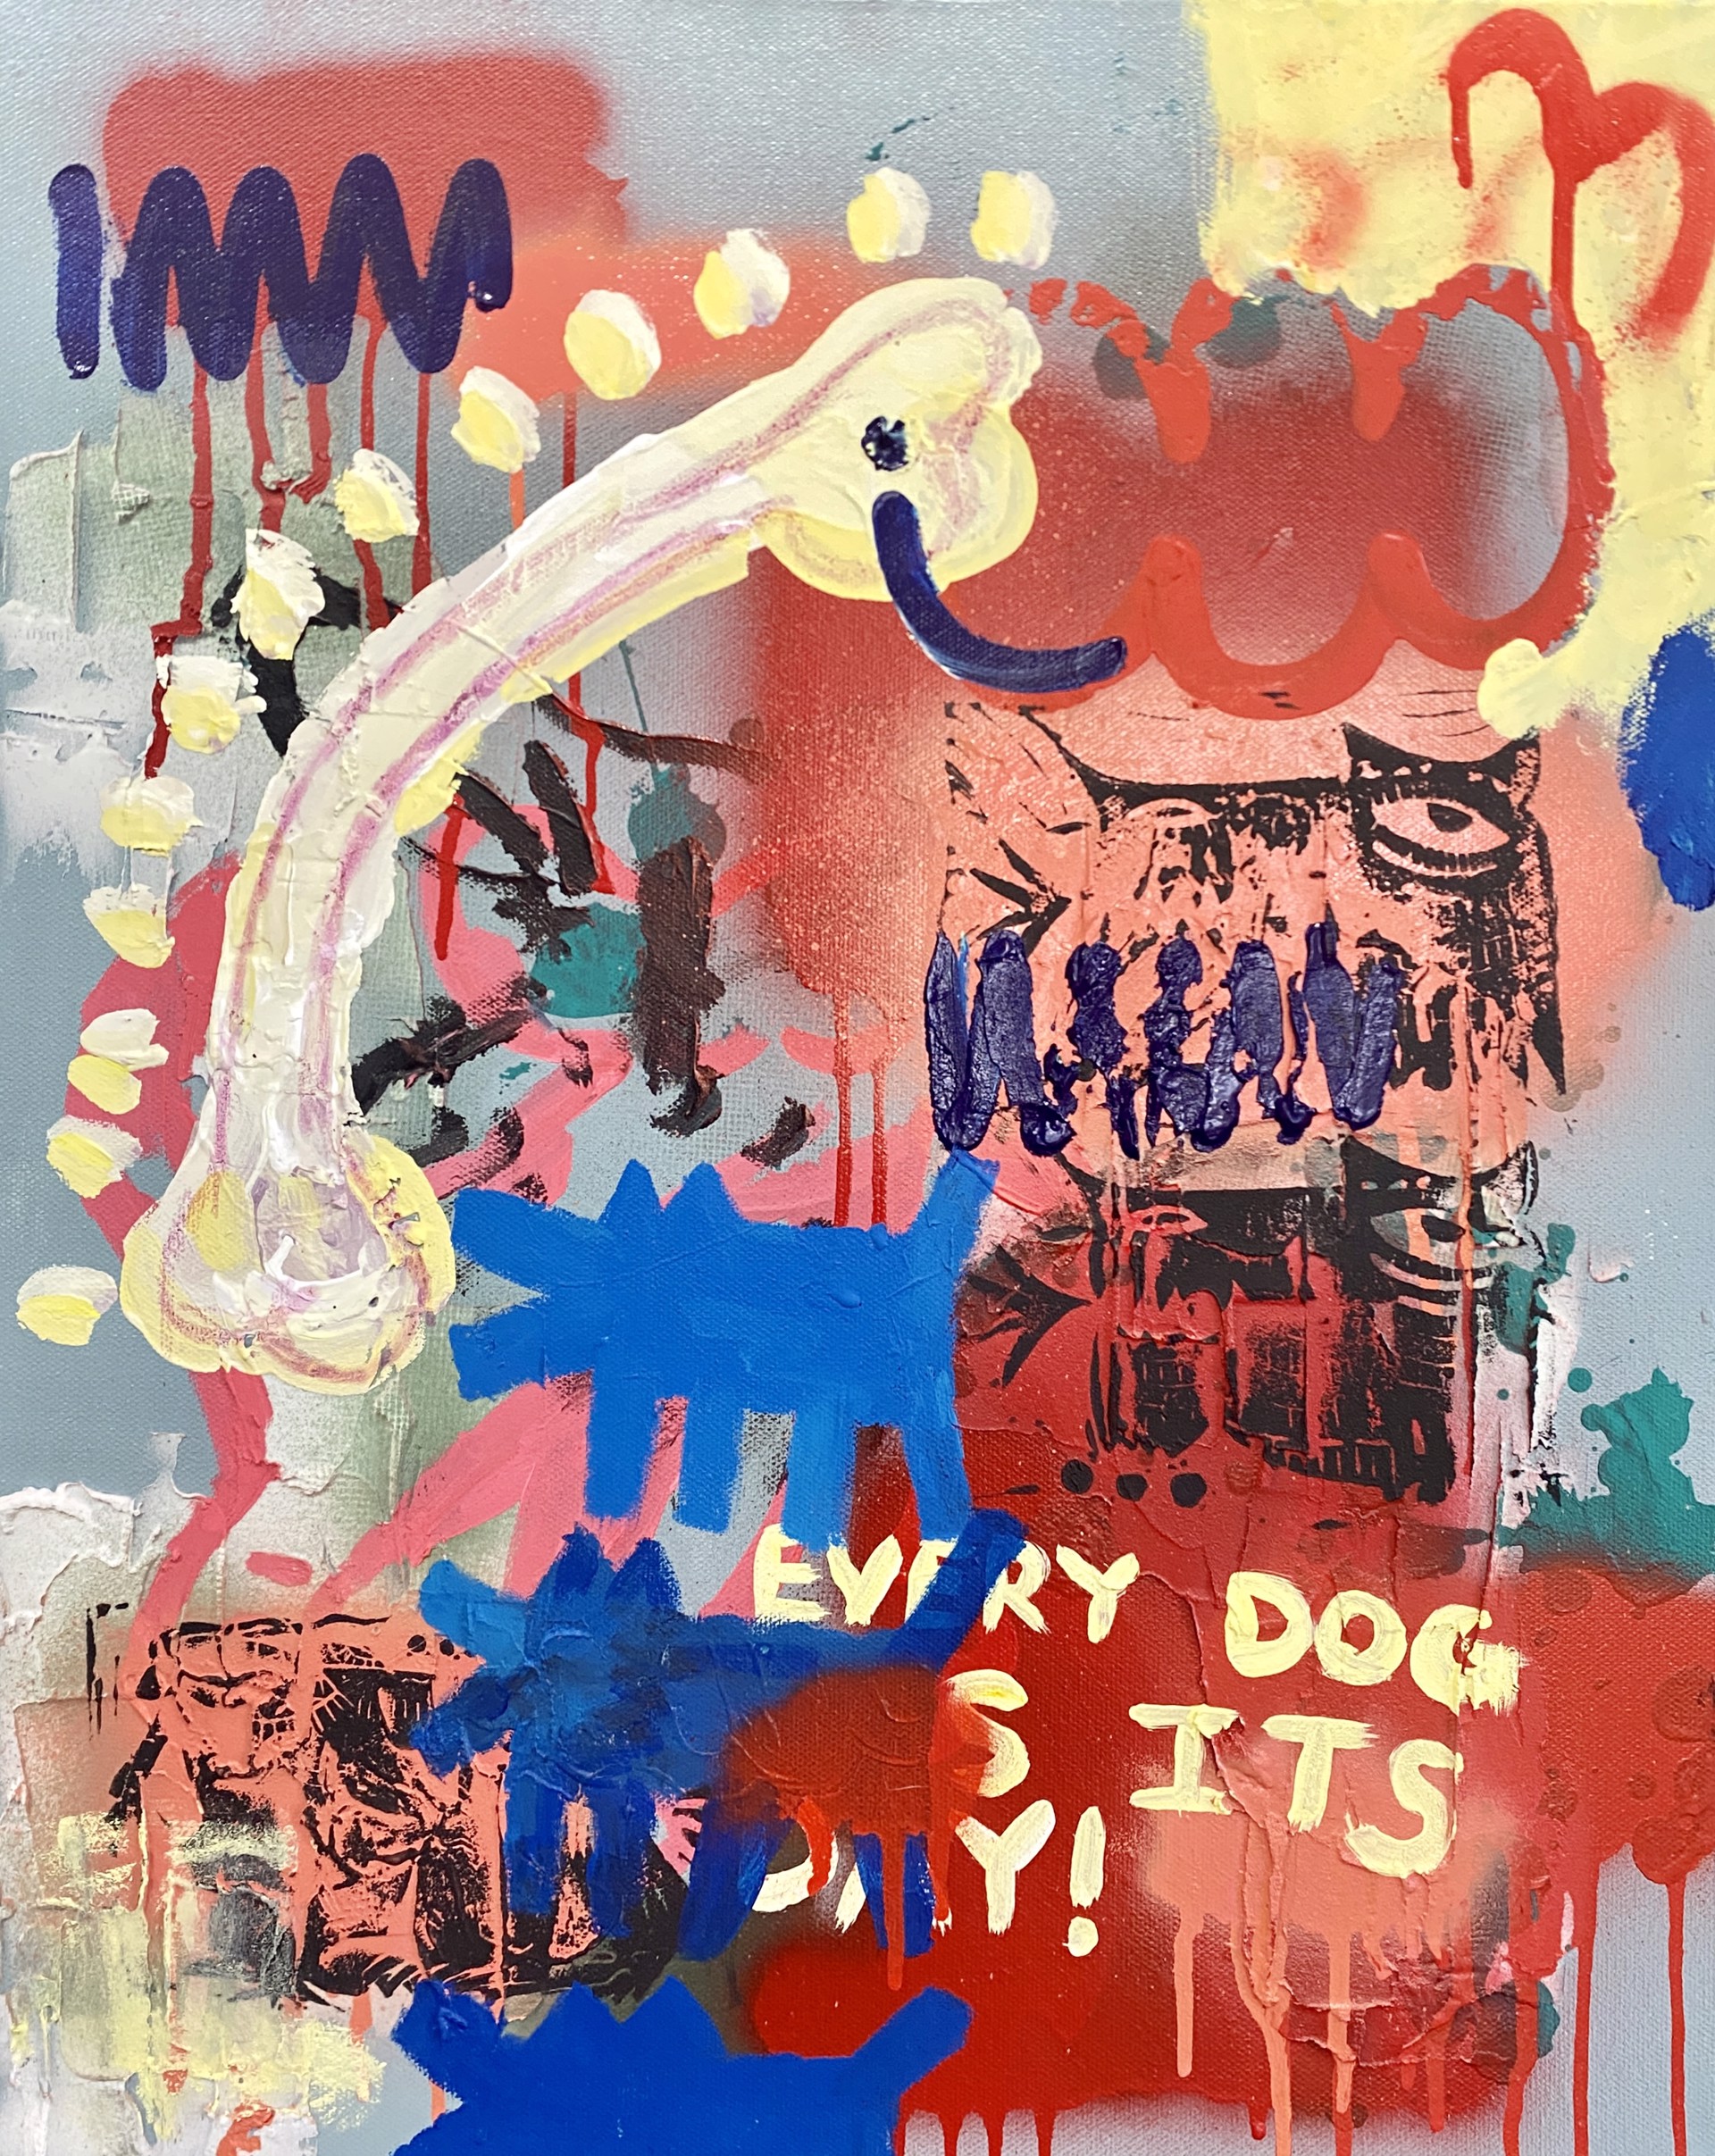 "Every Dog Has Its Day!" by Jacob "Zesty" Hartman by Art One Foundation